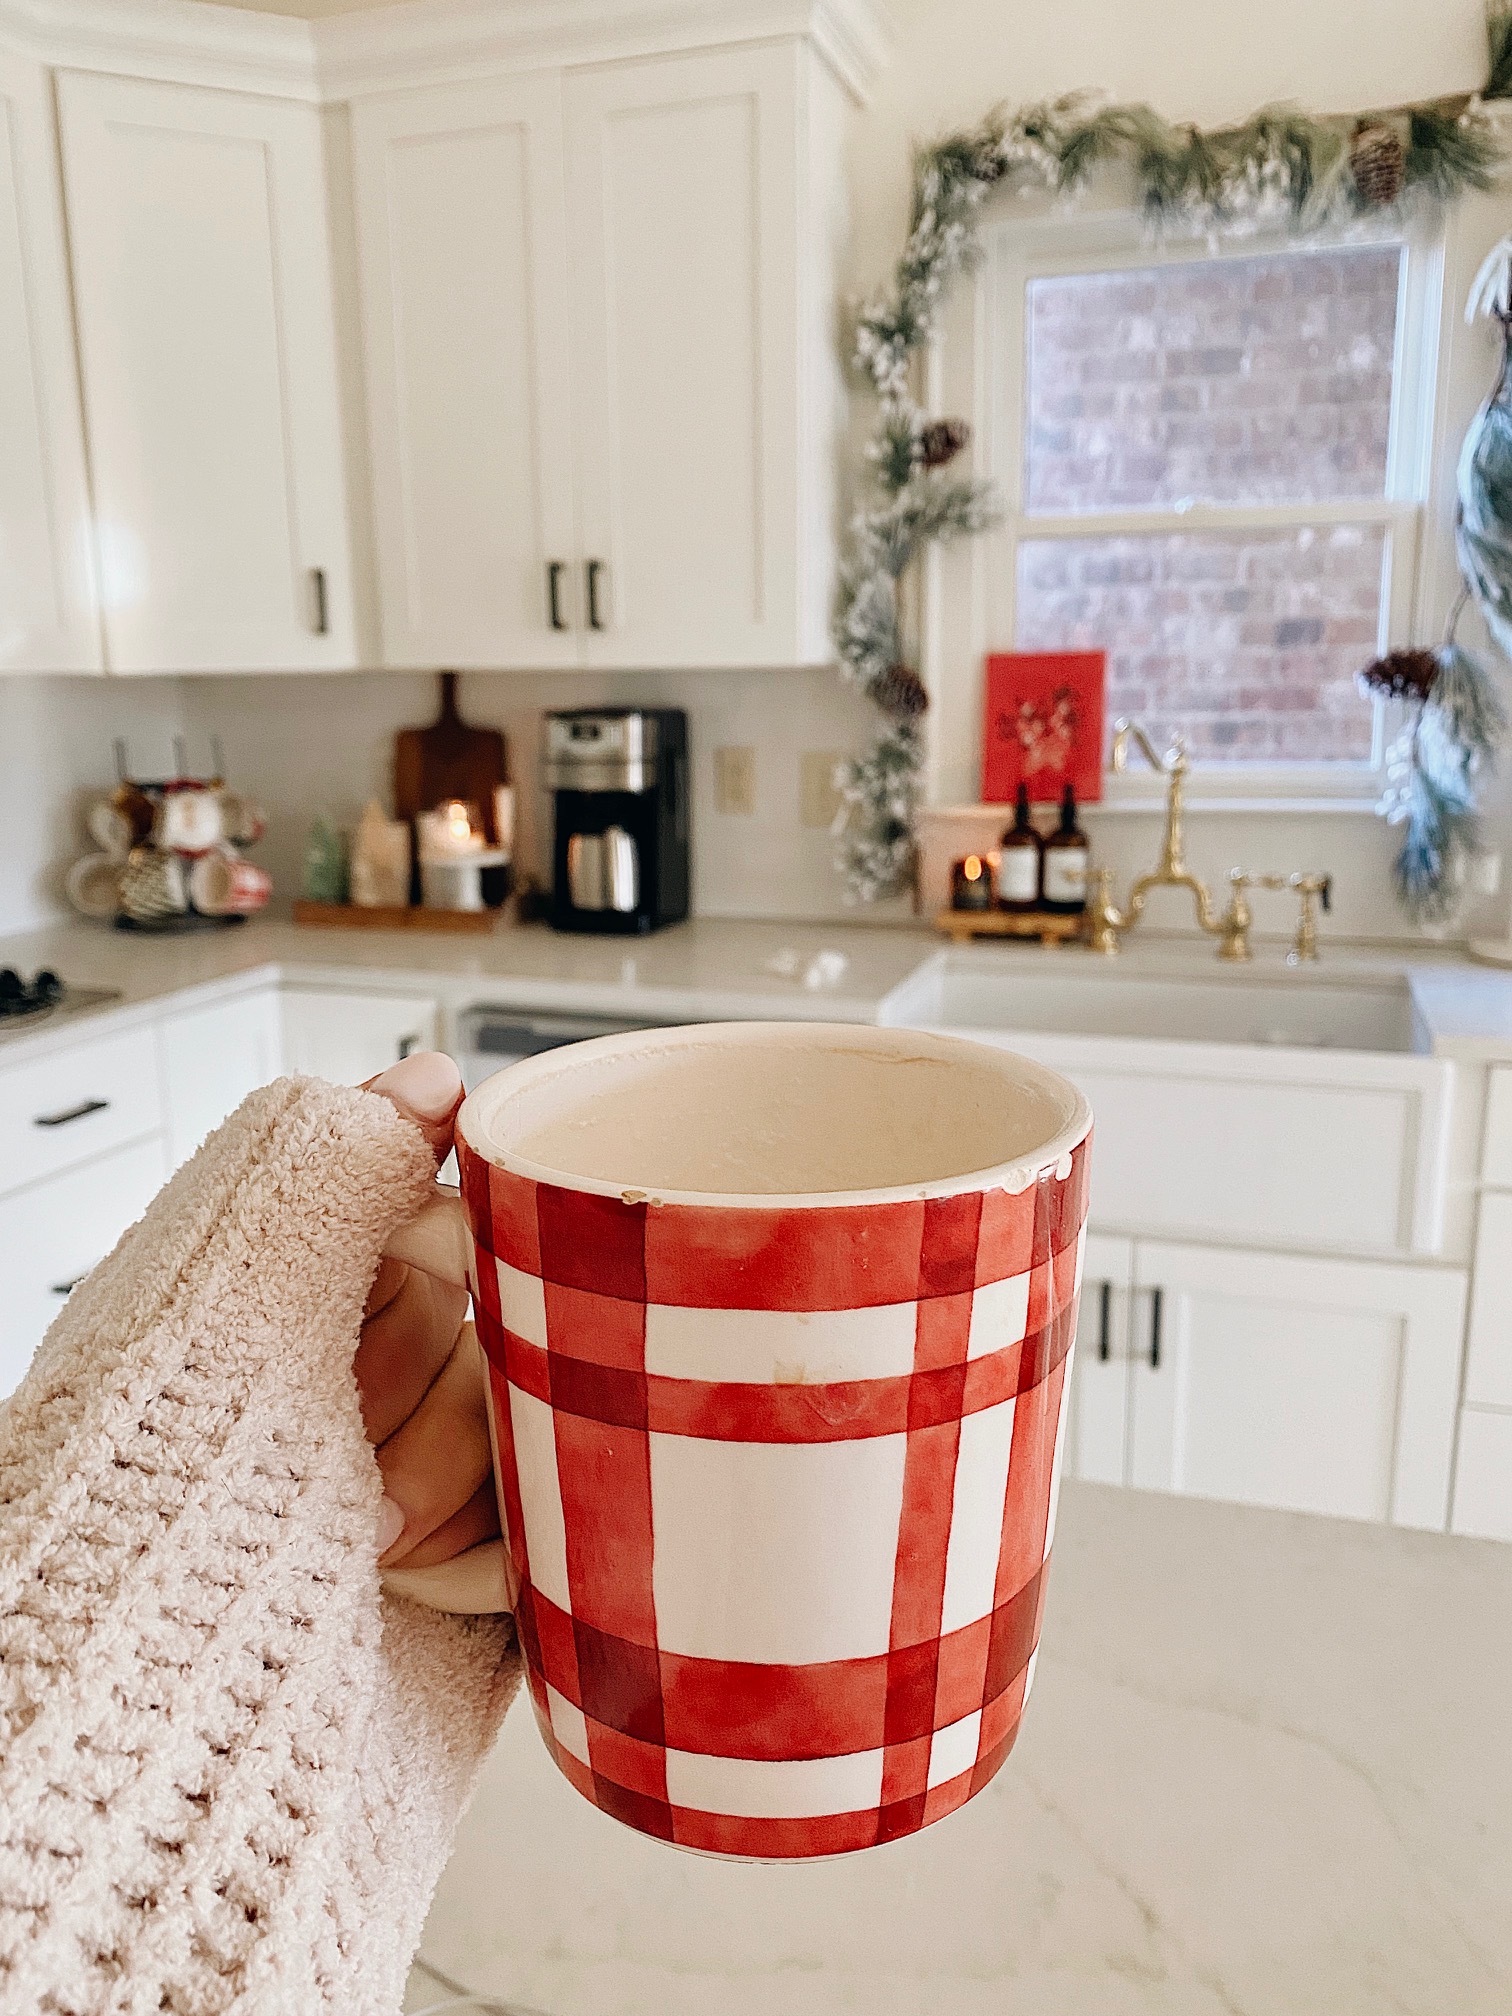 Holiday Home Tour 2021: Kitchen and Master Bedroom decor featured by top AL home blogger, She Gave It A Go